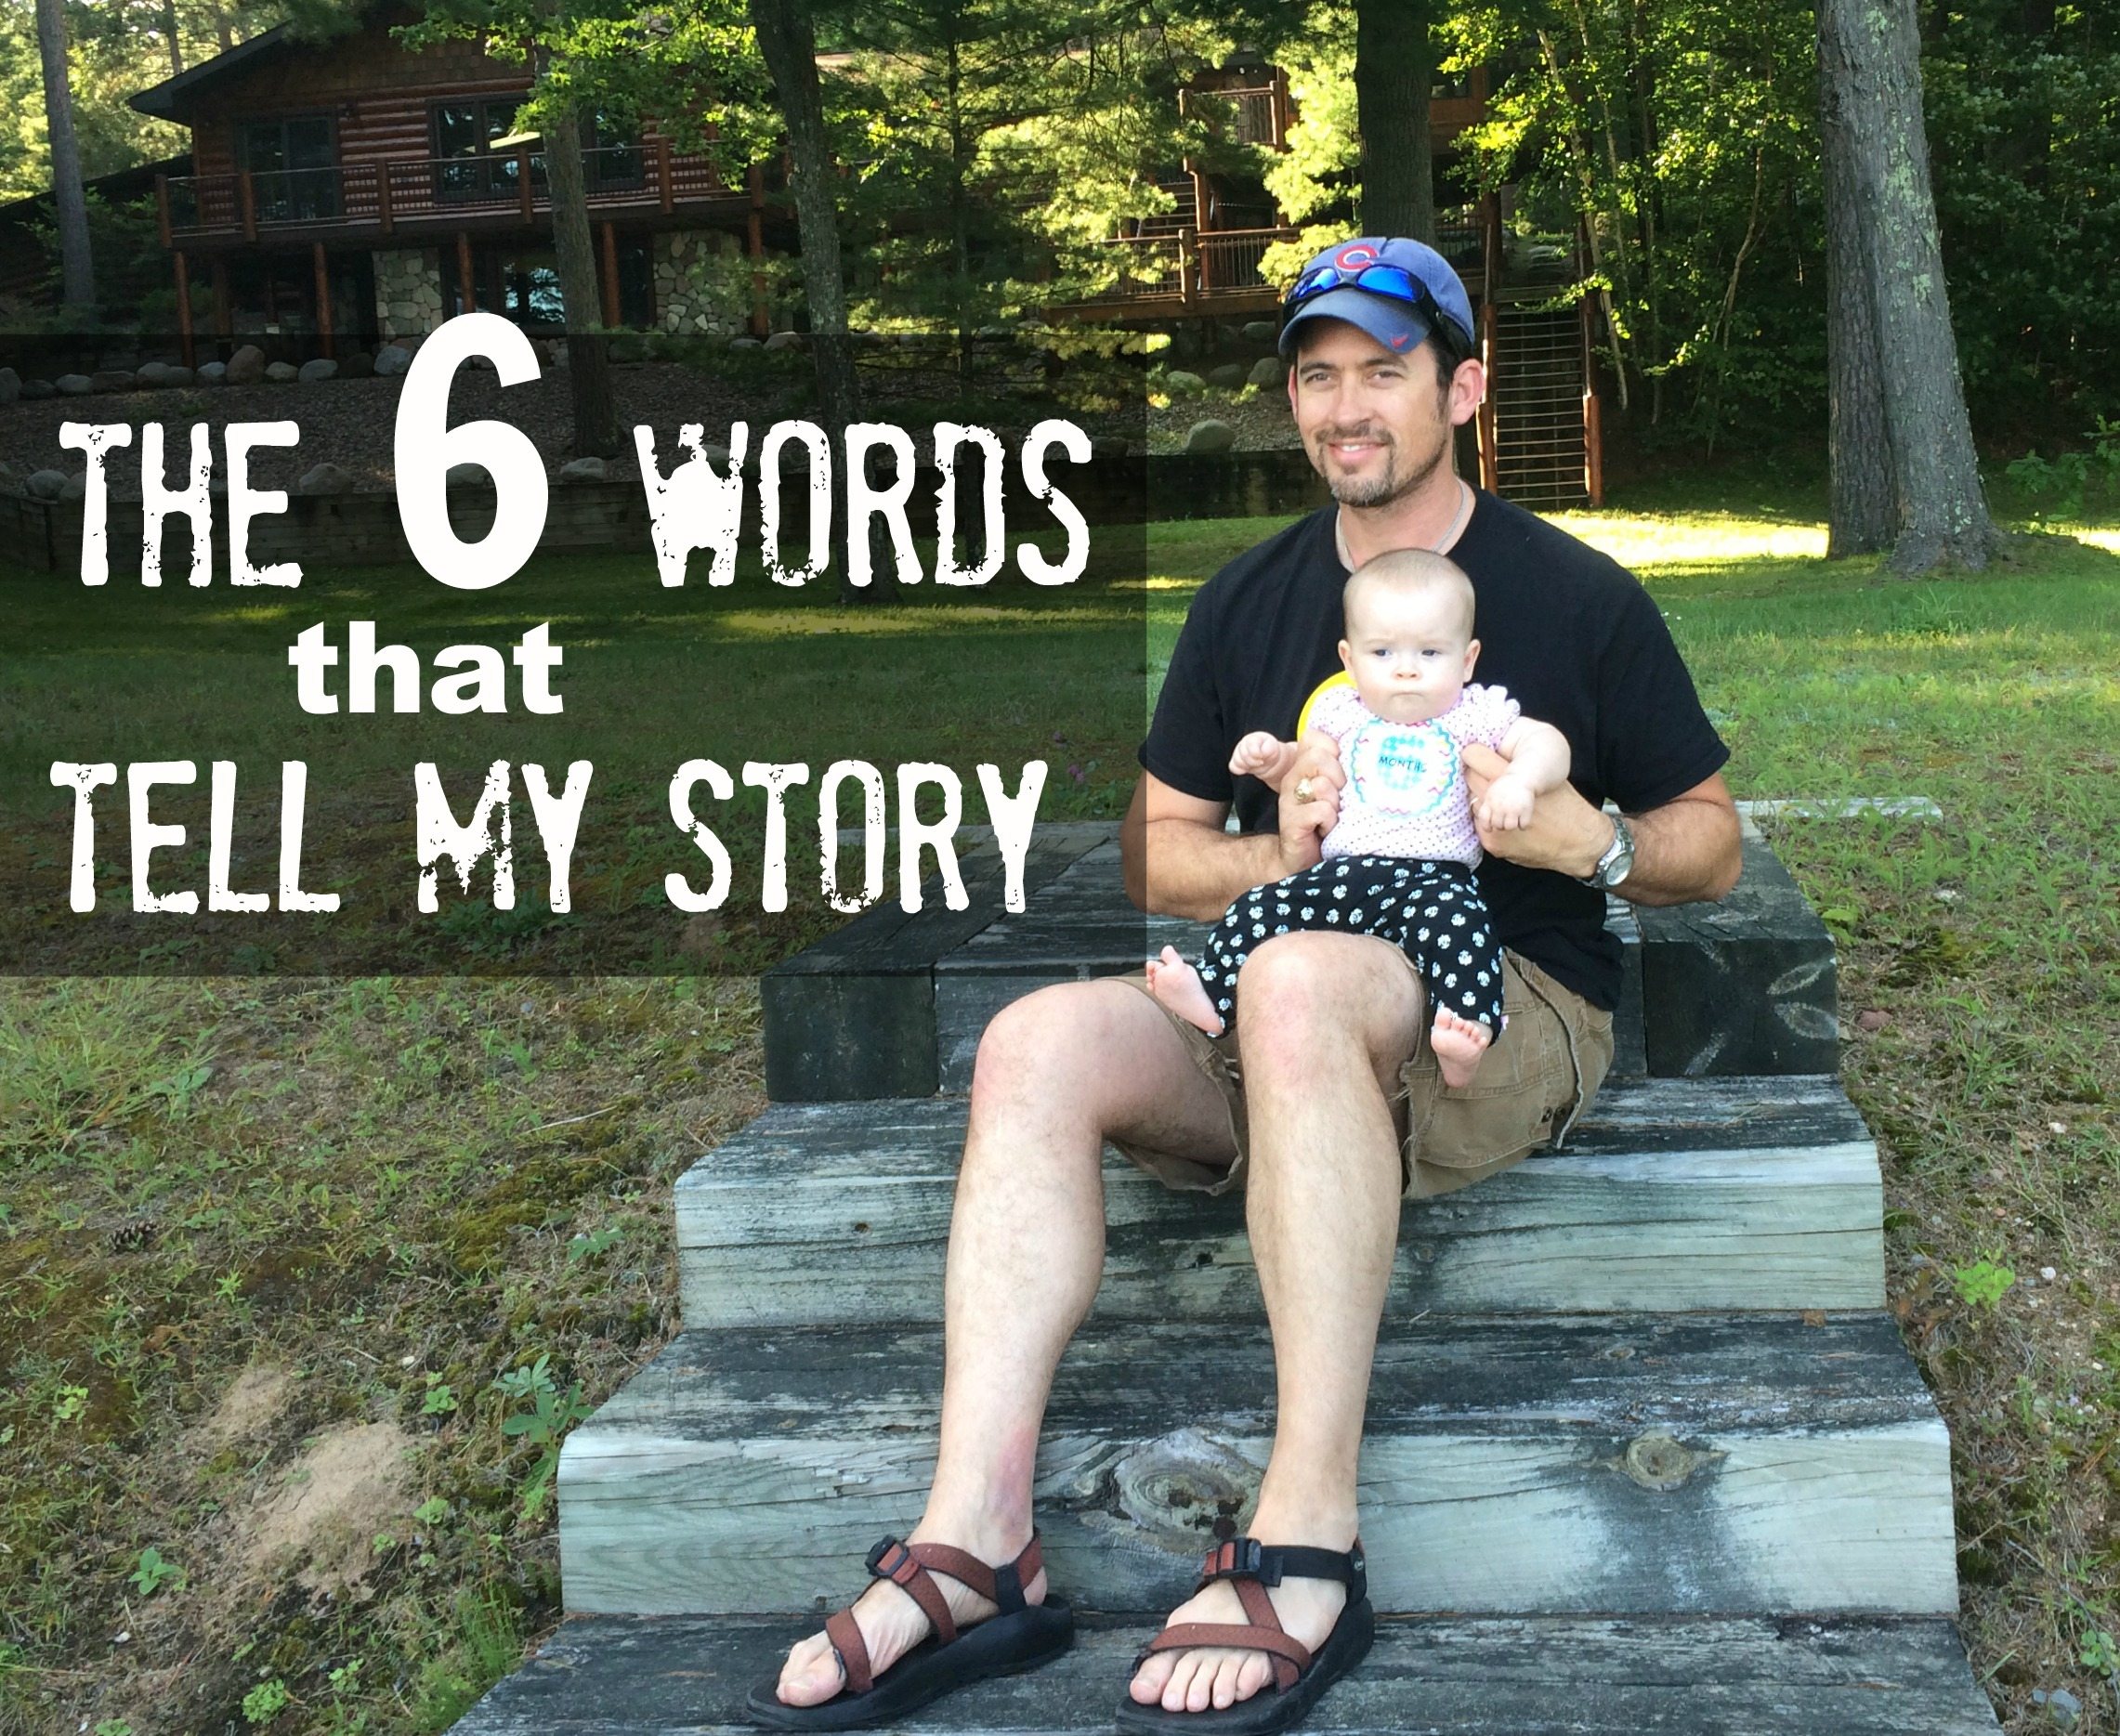 The 6 Words that Tell My Story